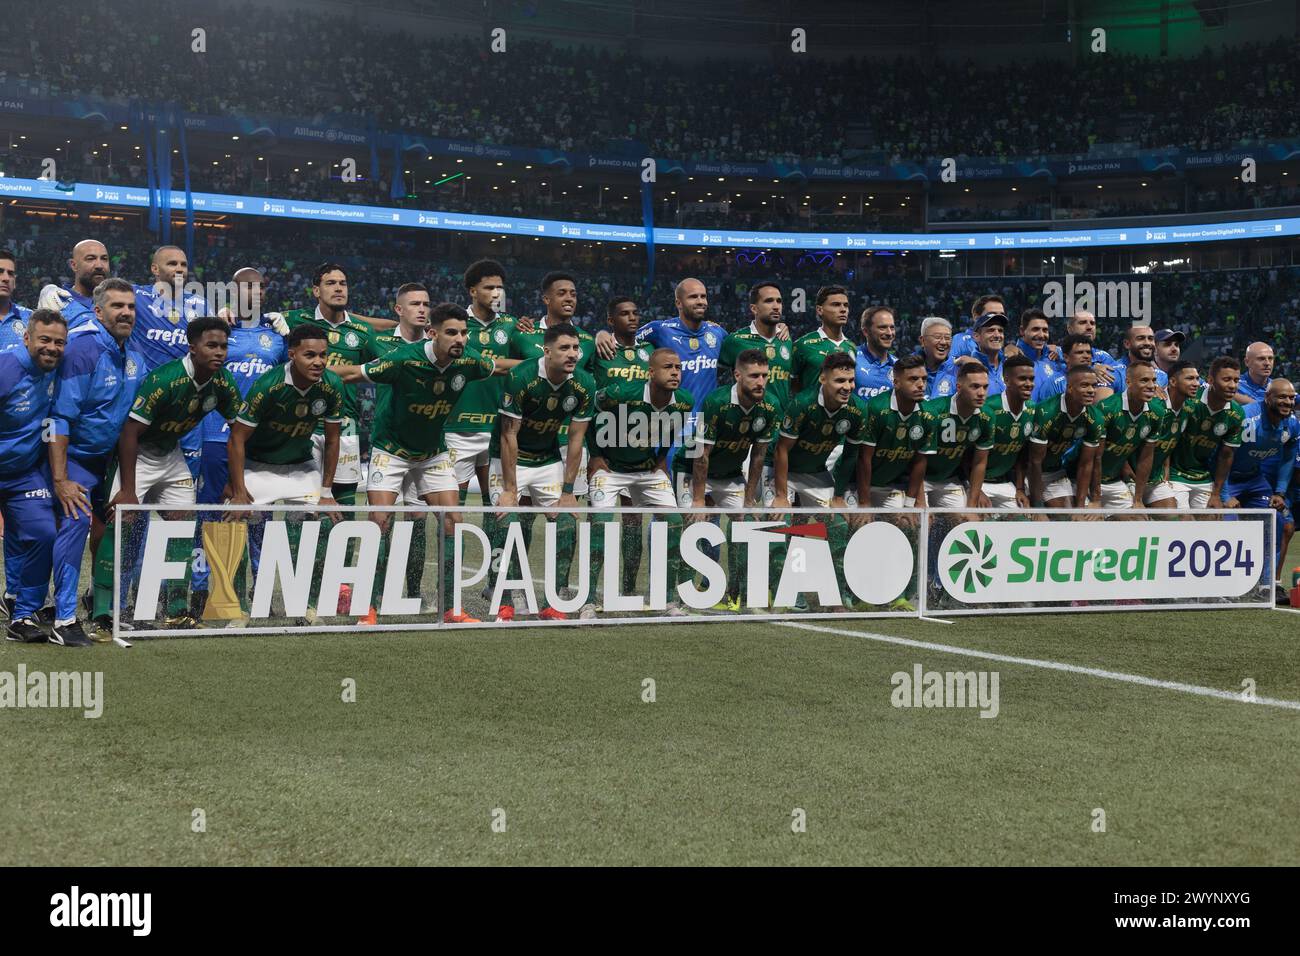 São Paulo (SP), March 7, 2024 - Football / Palmeiras vs Santos - Palmeiras team posed for picture, during the match between Palmeiras and Santos, valid for the final of the Campeonato Paulista de Futebol, held at Allianz Parque on Sunday afternoon (7th). Credit: Vilmar Bannach/Alamy Live News. Stock Photo